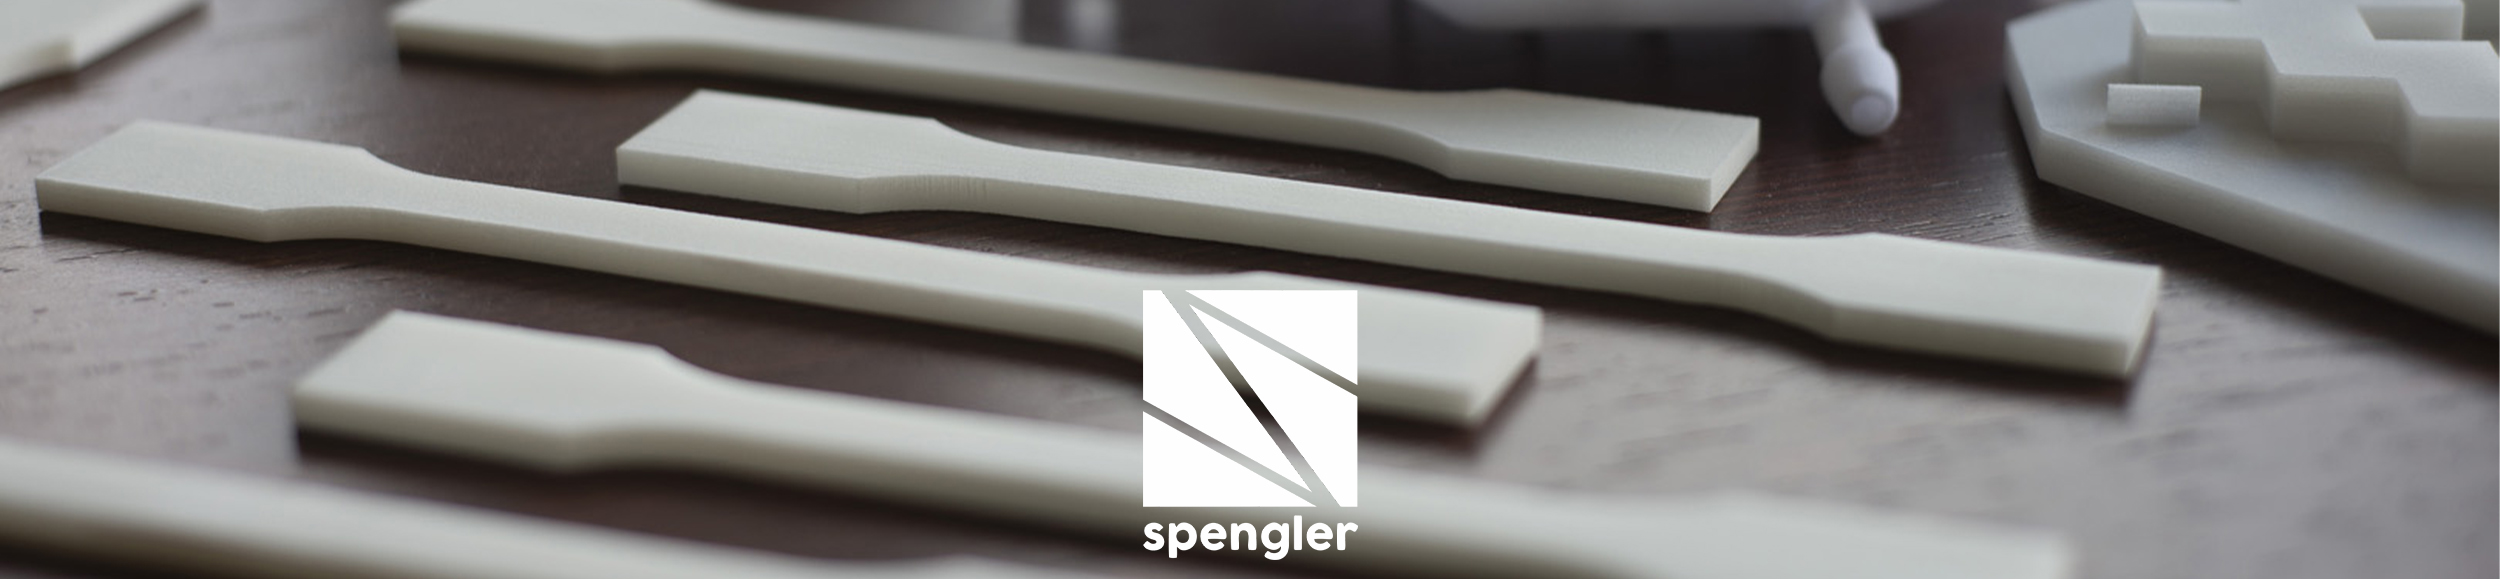 spengler-france-sf4t-additive-manufacturing-integram-engineering-consulting